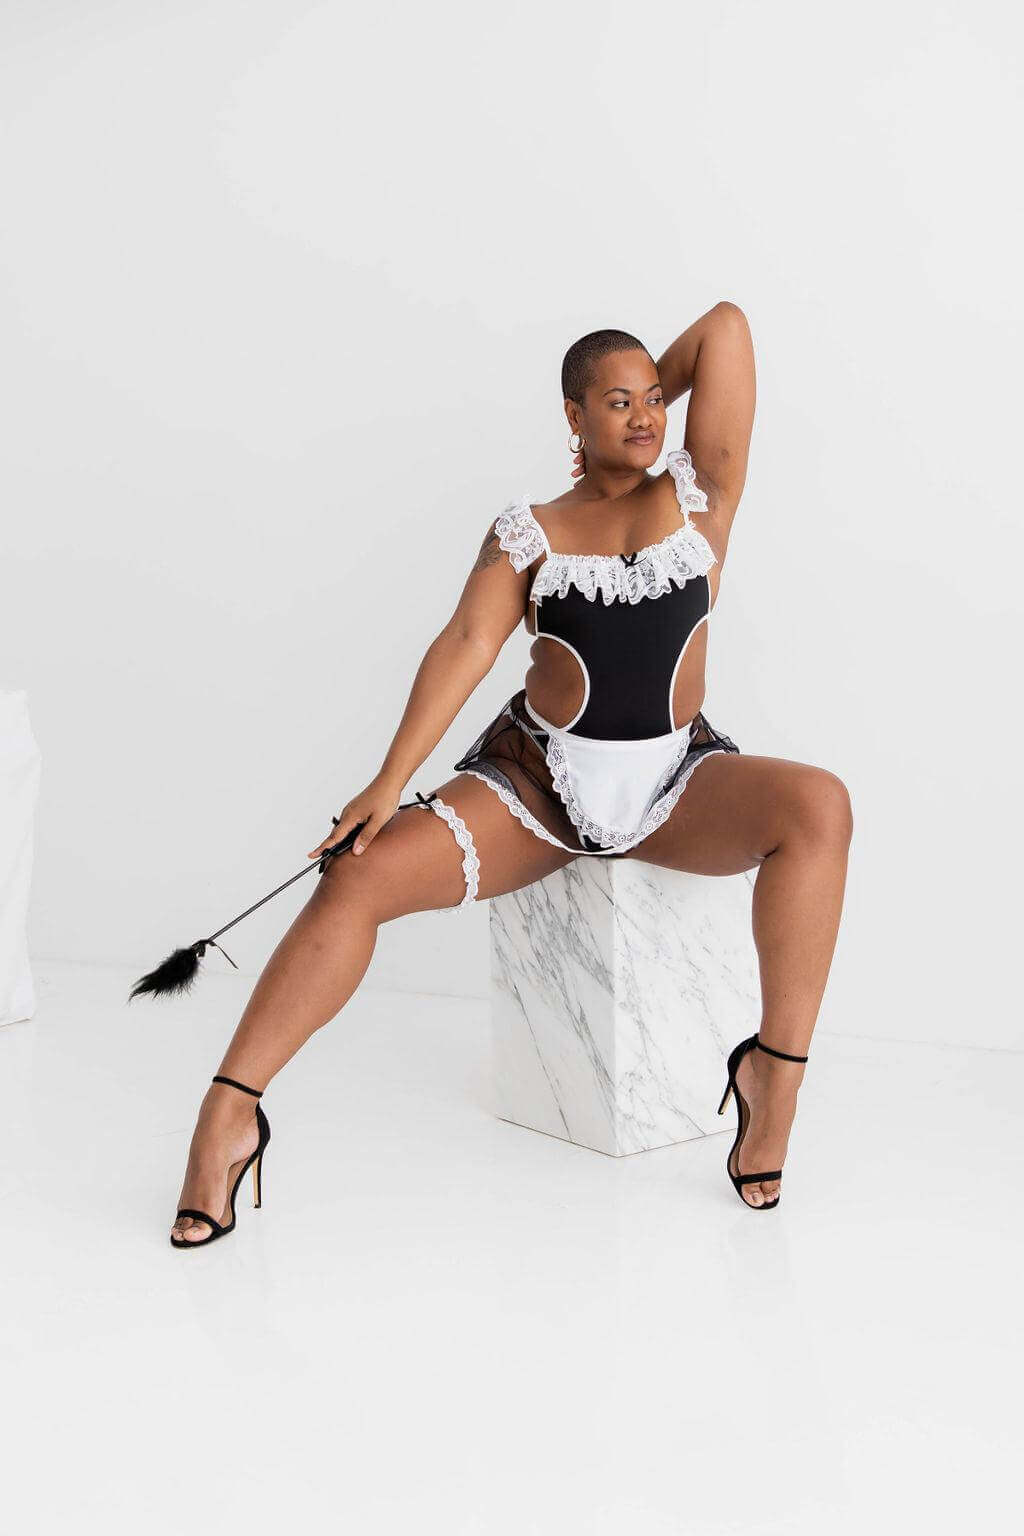 Amy Maid Lace Lingerie Costume-costume-Naked Curve